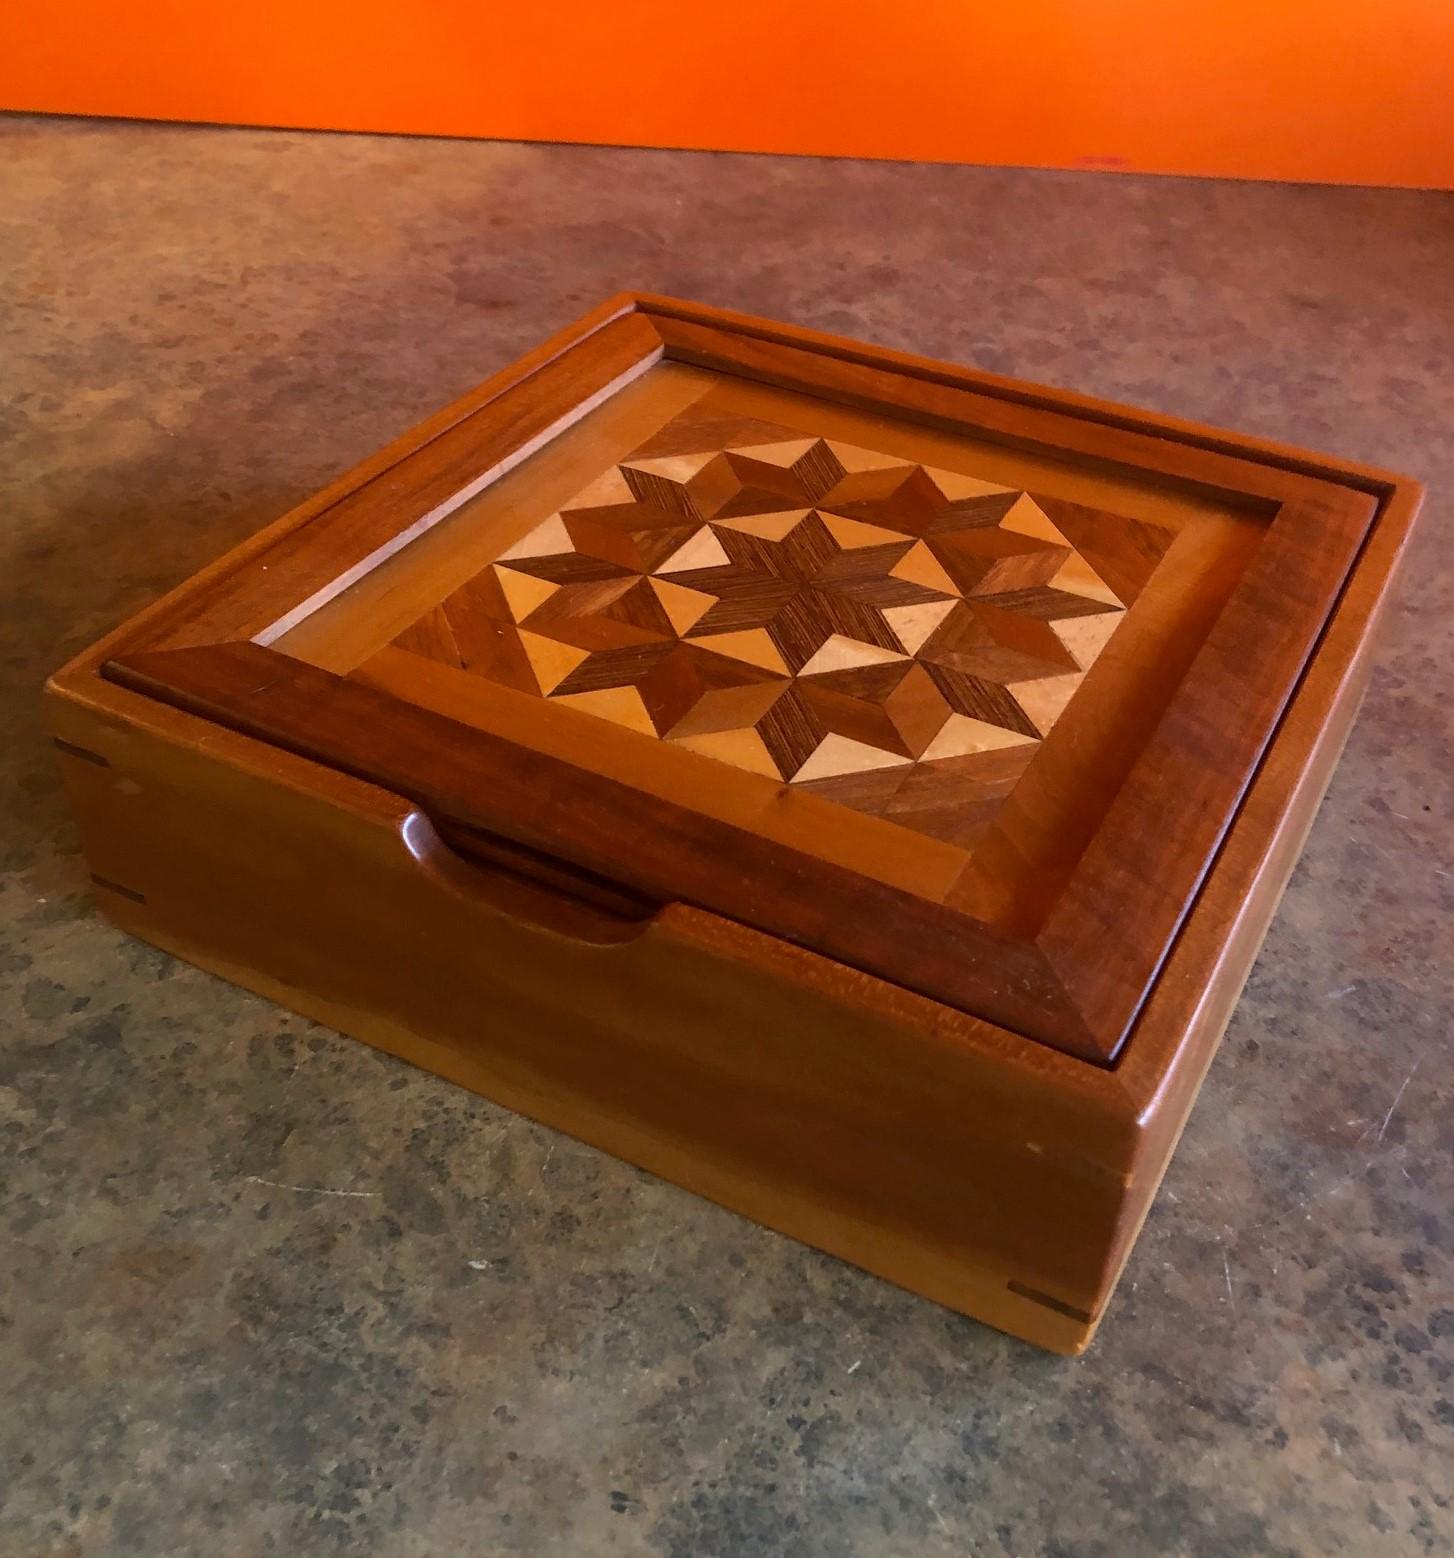 Unique inlaid marquetry box made from a number of hardwoods. Wonderful handmade piece with a great symmetrical 